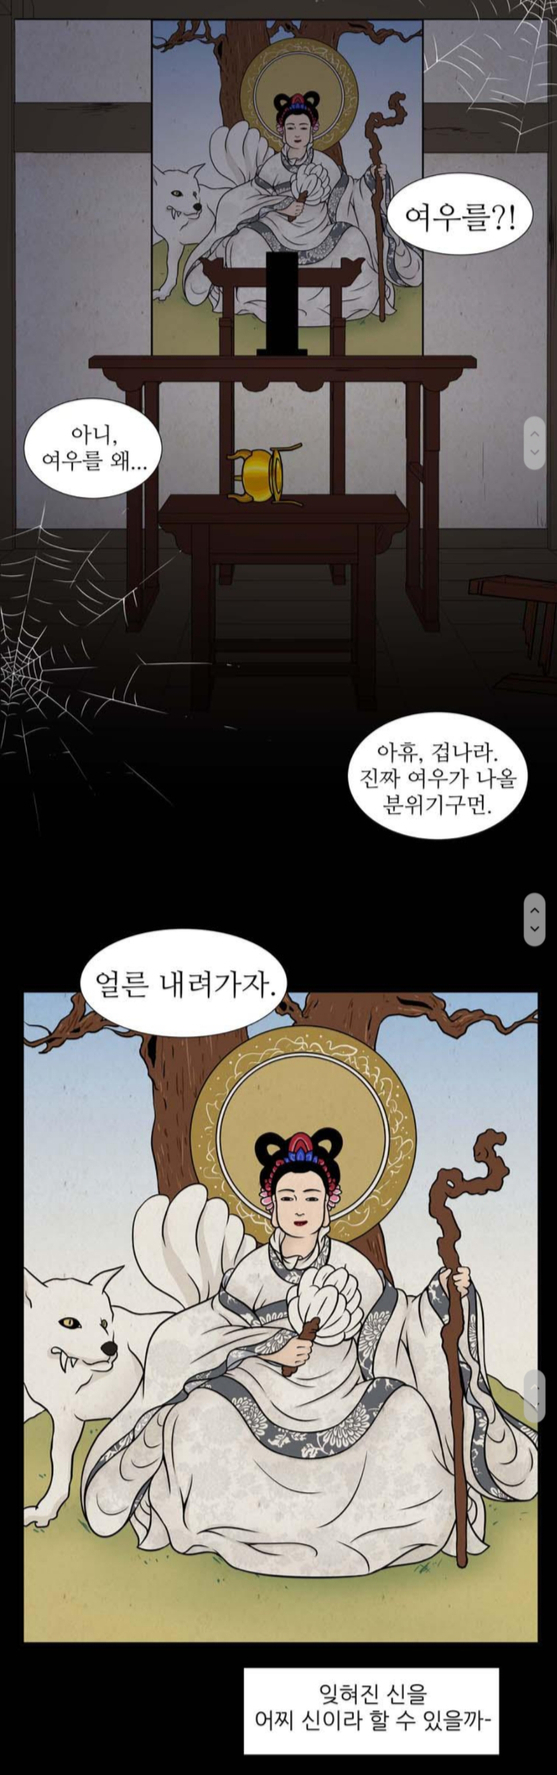 A scene from Daum Webtoon's ″Princess Bari″ (translated) series ends with the line, "How can a forgotten god be deemed a god?" [SCREEN CAPTURE]